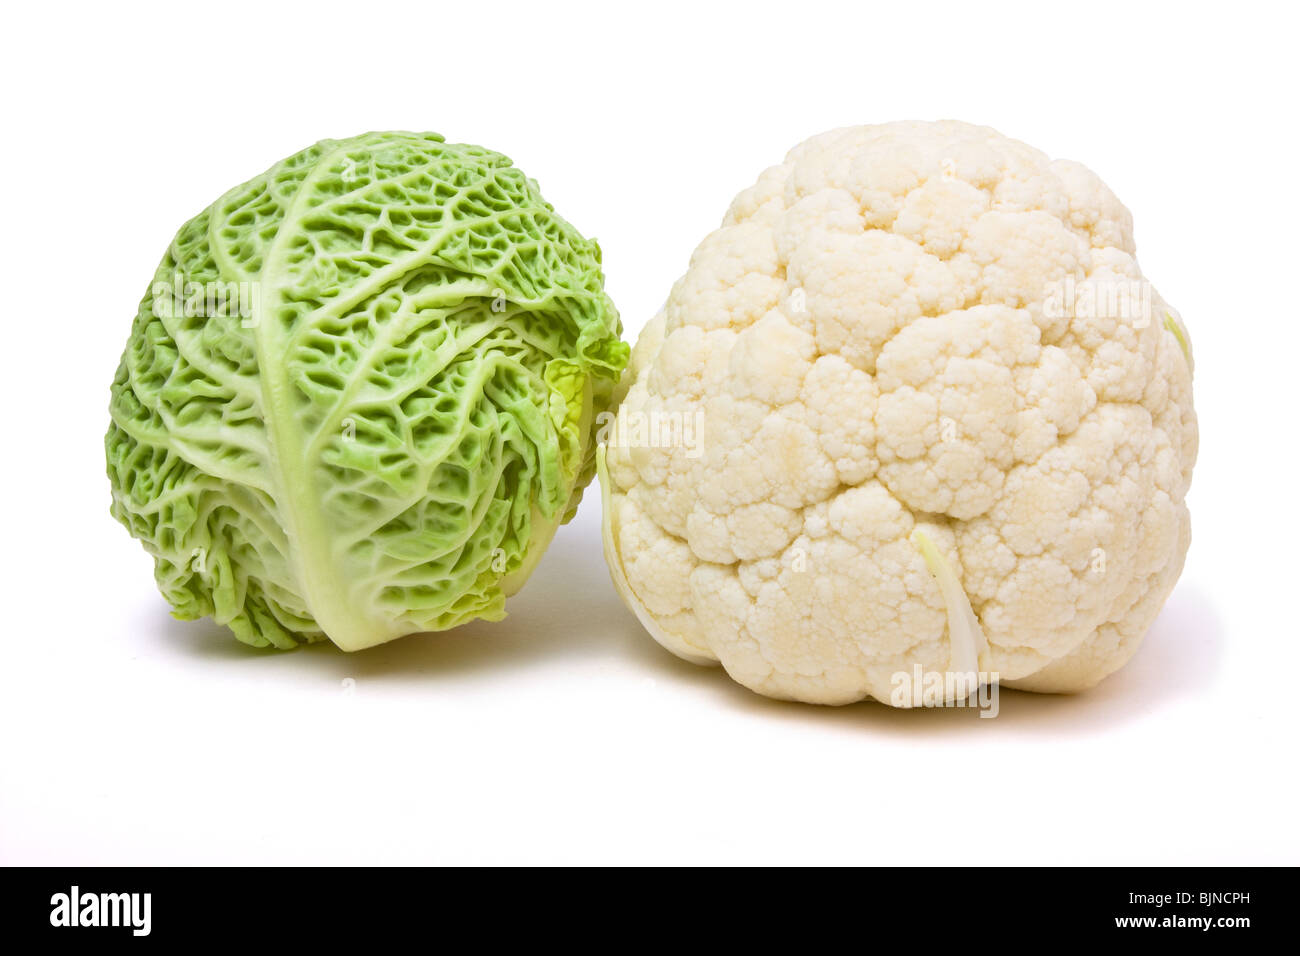 Cabbage and cauliflower close up from low viewpoint against white background. Stock Photo